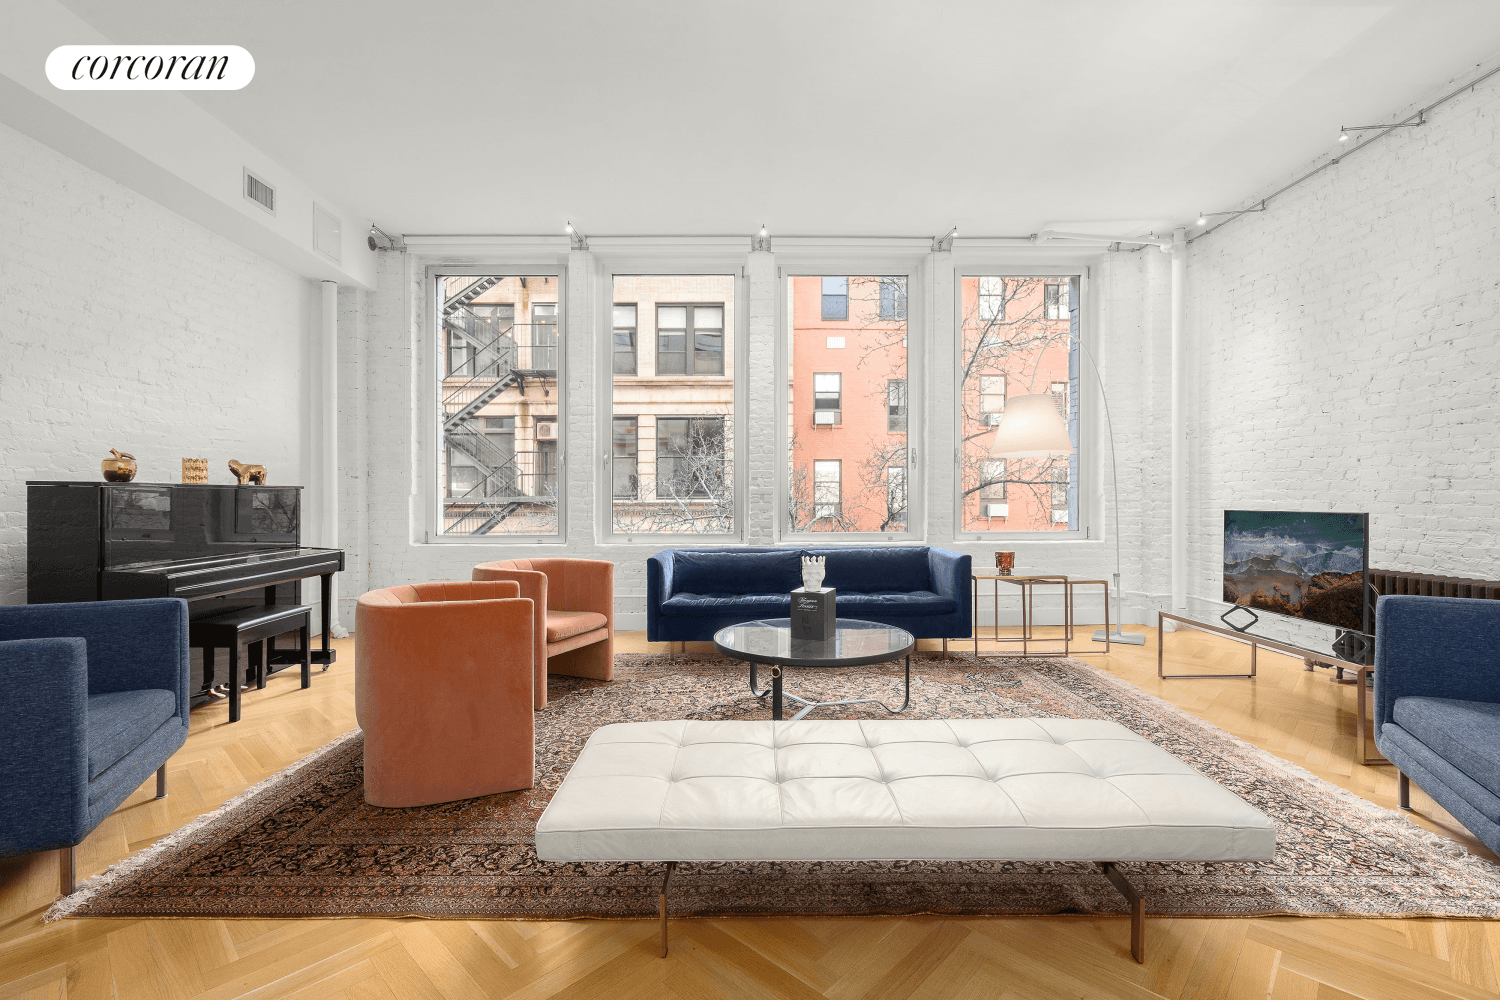 55 East 11th Street 3rd FloorThis classic village loft awaits you in this wonderful boutique Greenwich Village Loft Co Operative.